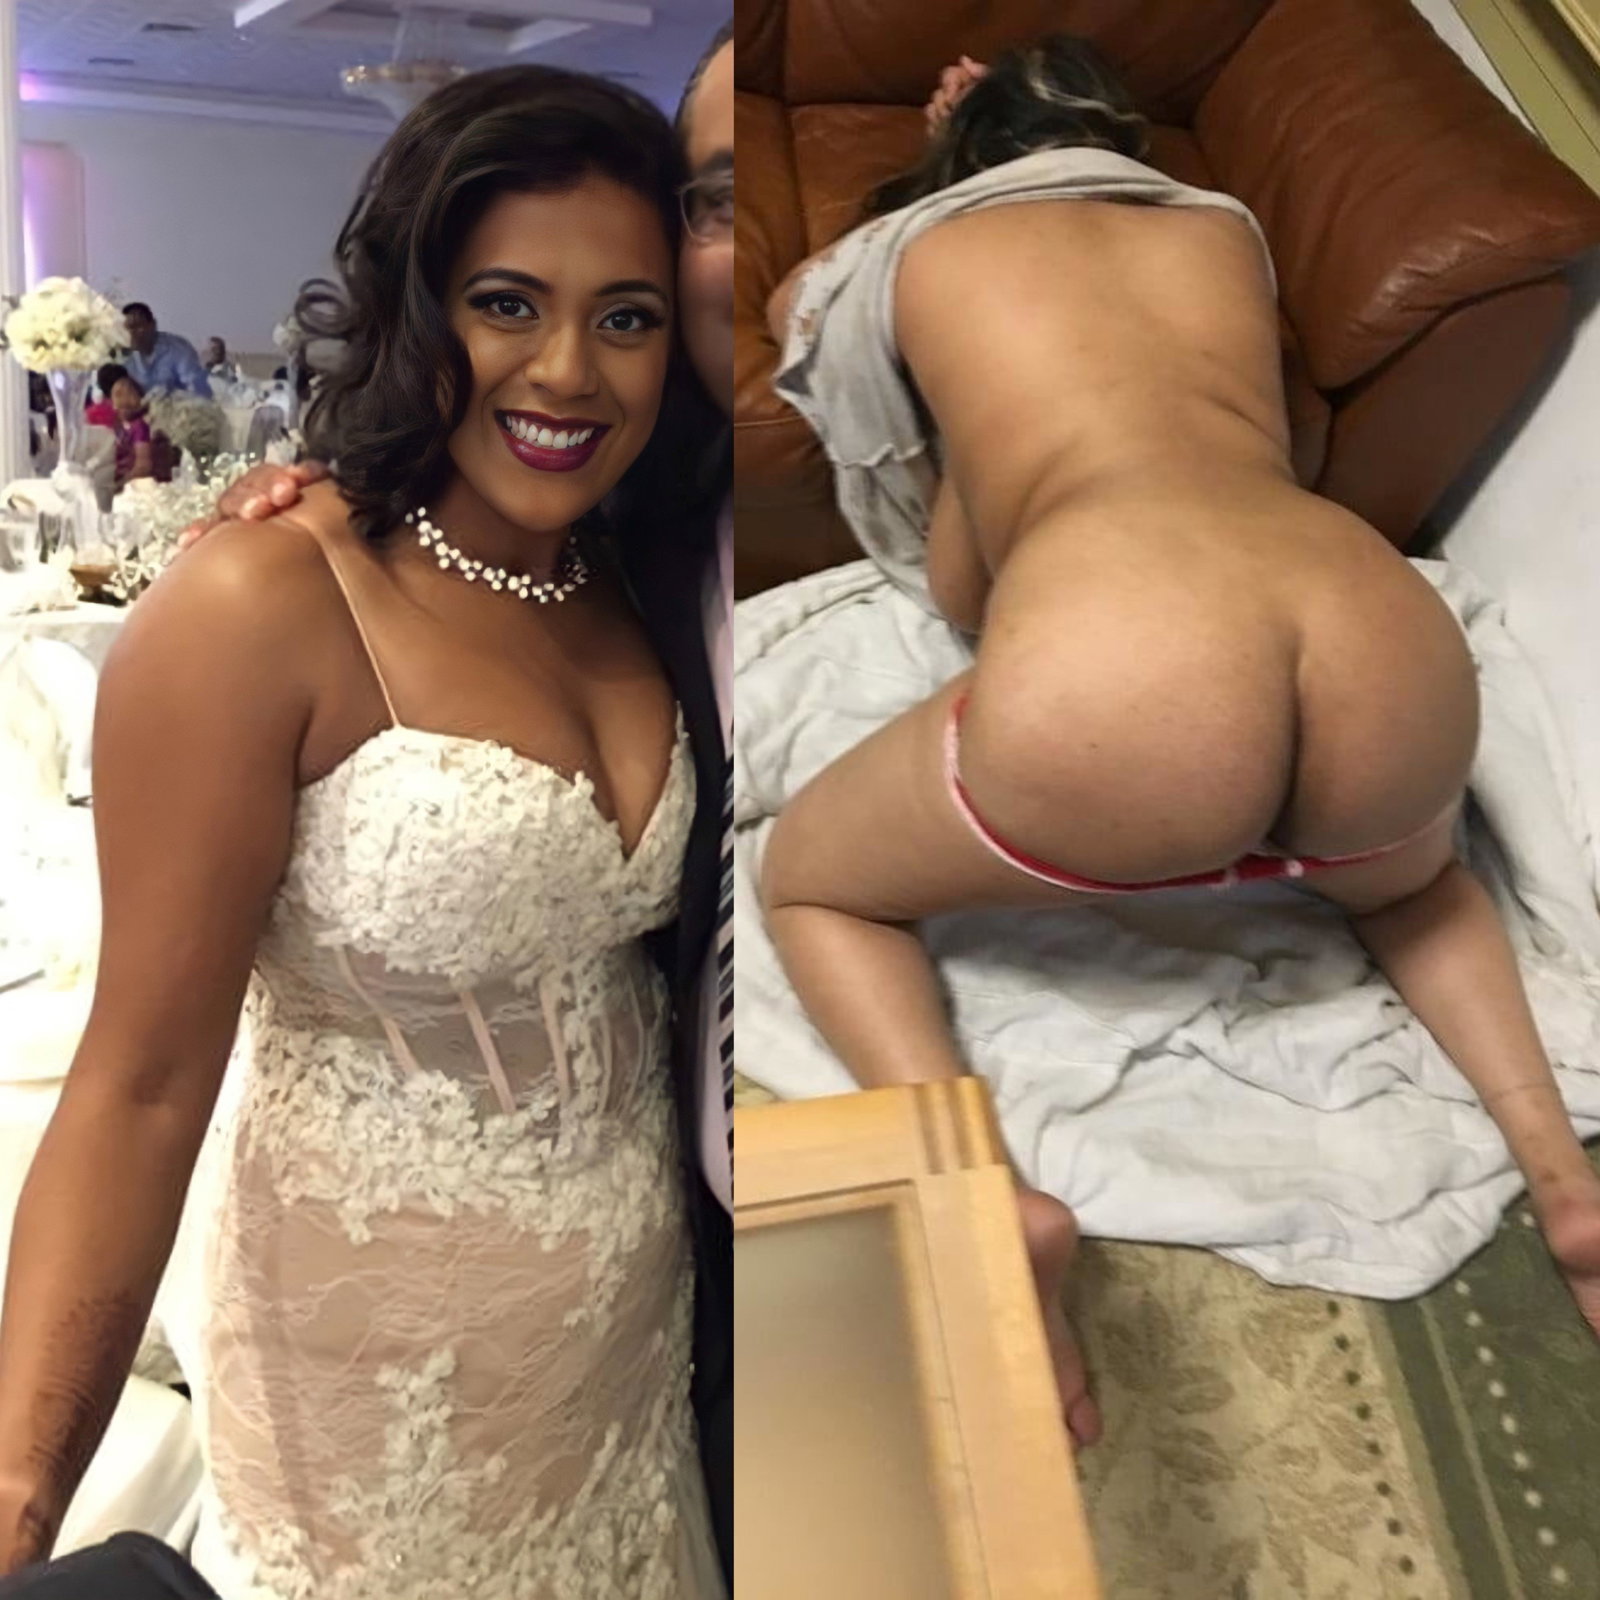 Watch the Photo by maxis735 with the username @maxis735, posted on May 31, 2022. The post is about the topic India. and the text says '#bigboobs #bigtits #busty #bigass #pov #milf #beauty #amateur #naturalboobs #onoff #beforeafter #dressedundressed'